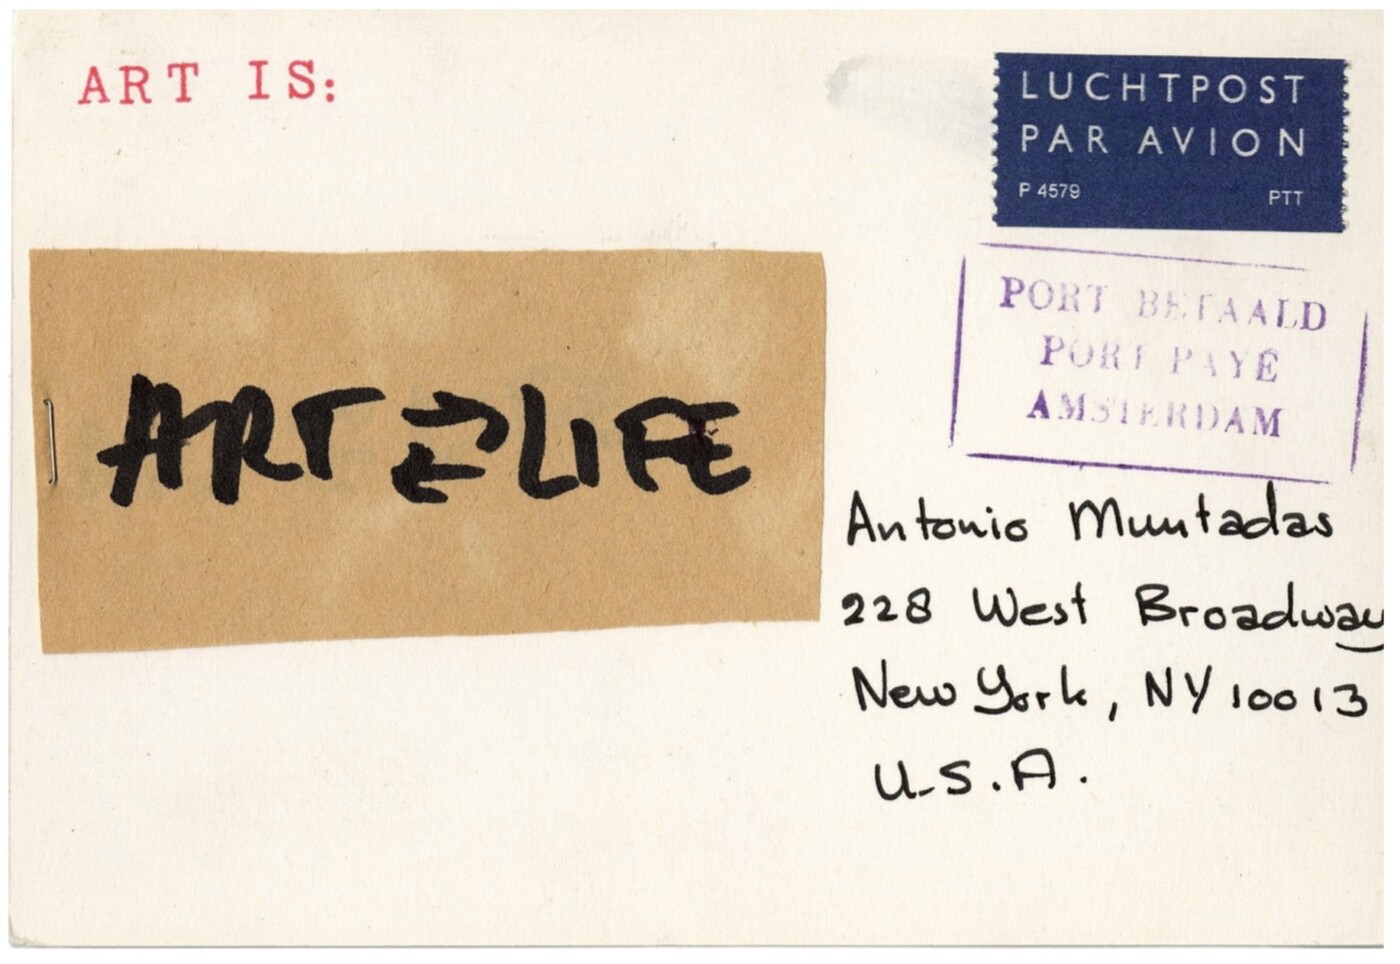 Mail piece pre-stamped in red at top left with the prompt "Art is:" underneath, at right, there is a brown label handwritten "Art - Life" with arrows pointing between the two words. At left there is address information and postmarks.